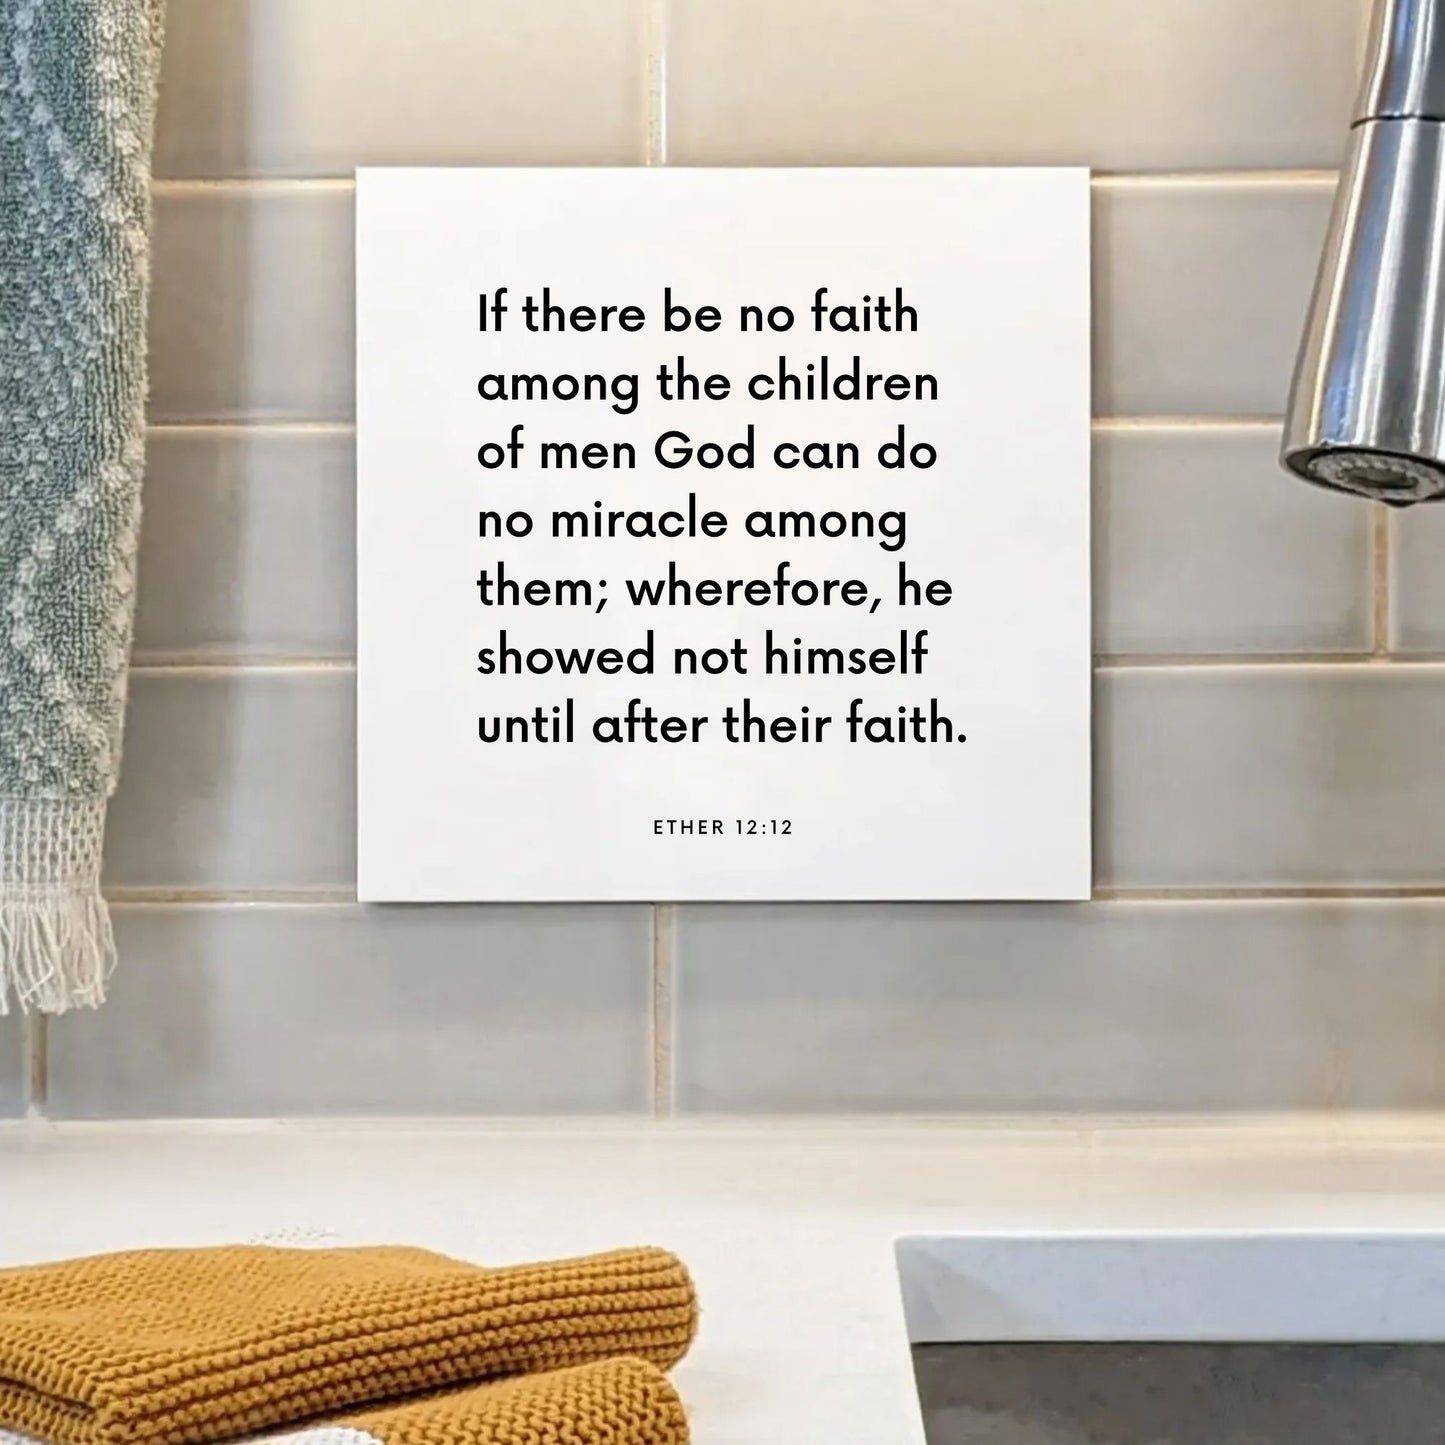 Sink mouting of the scripture tile for Ether 12:12 - "If there be no faith, God can do no miracle"